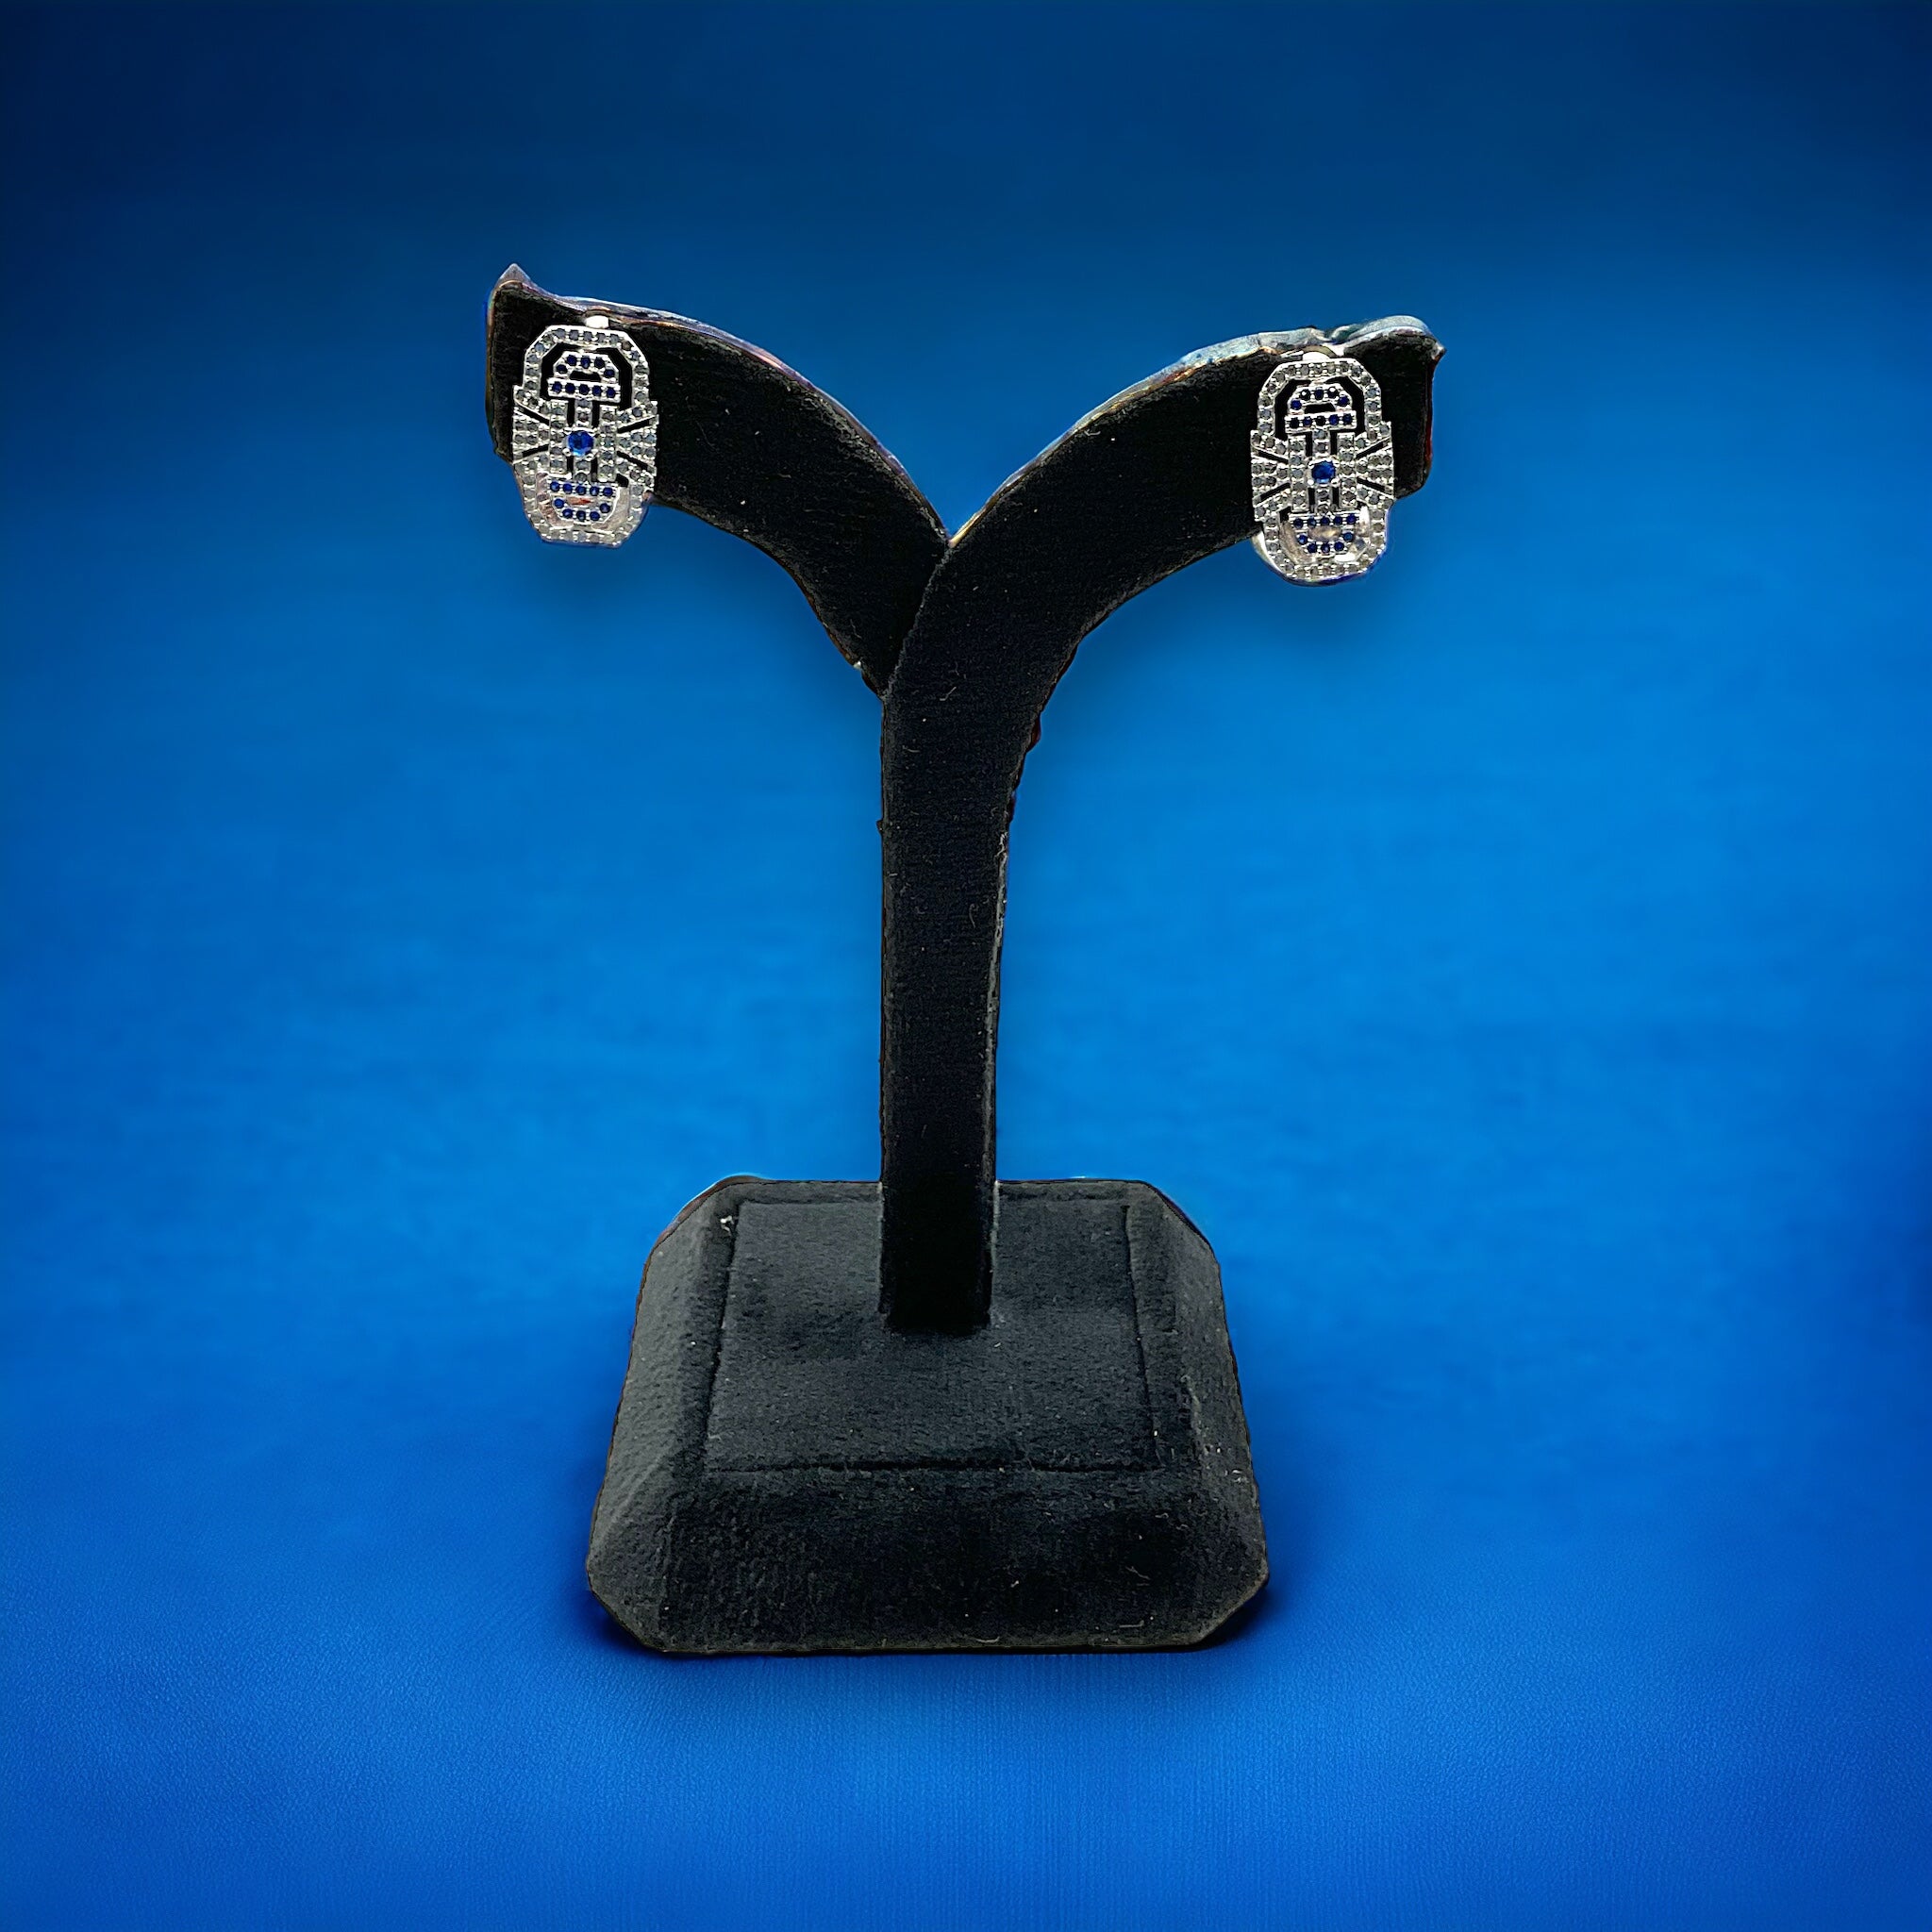 a pair of earrings on a stand on a blue background